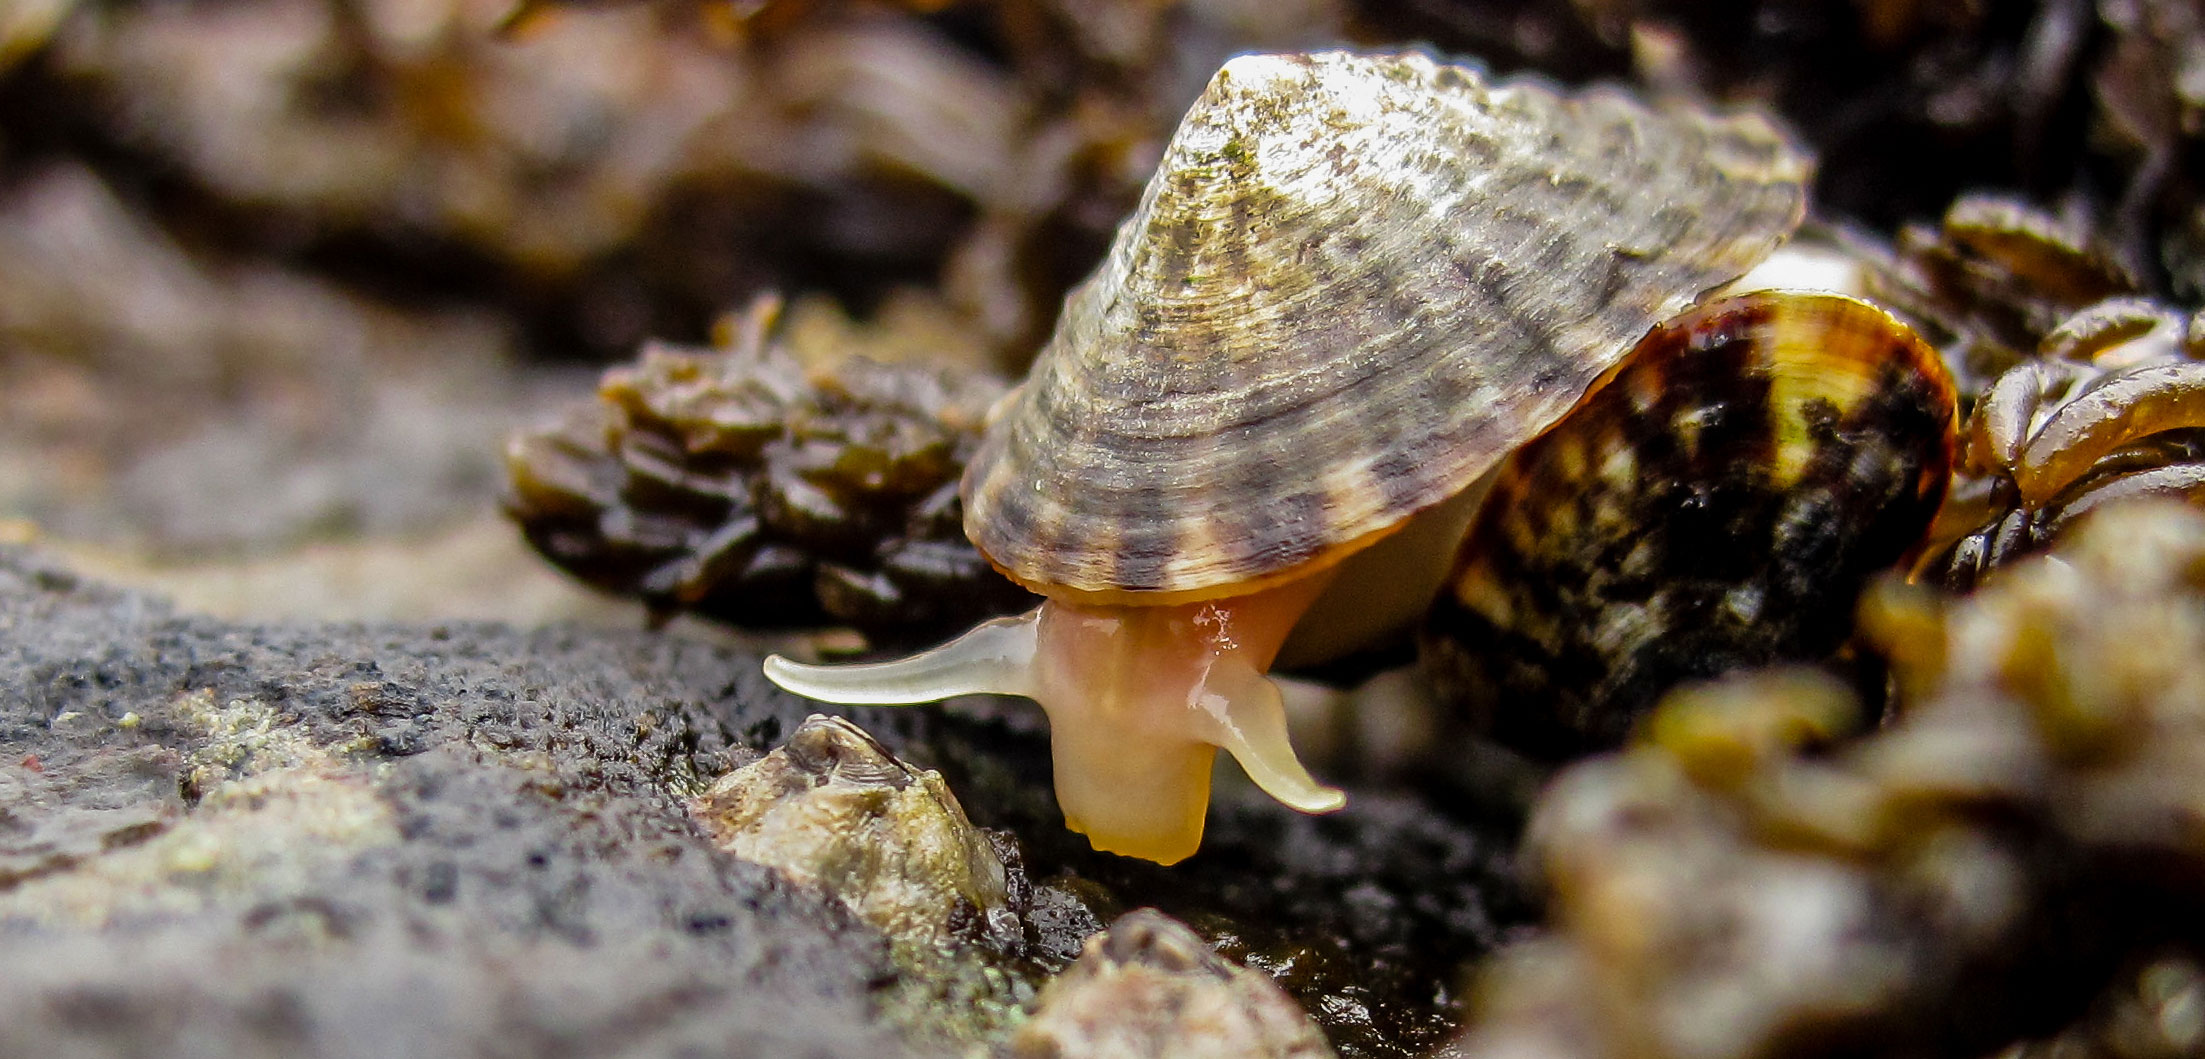 Limpets are easy to overlook—so too is their effect on the environment. But careful consideration of how all the lifeforms in an area interact is key to understanding how ecosystems thrive. Photo by Rebecca Kordas/UBC